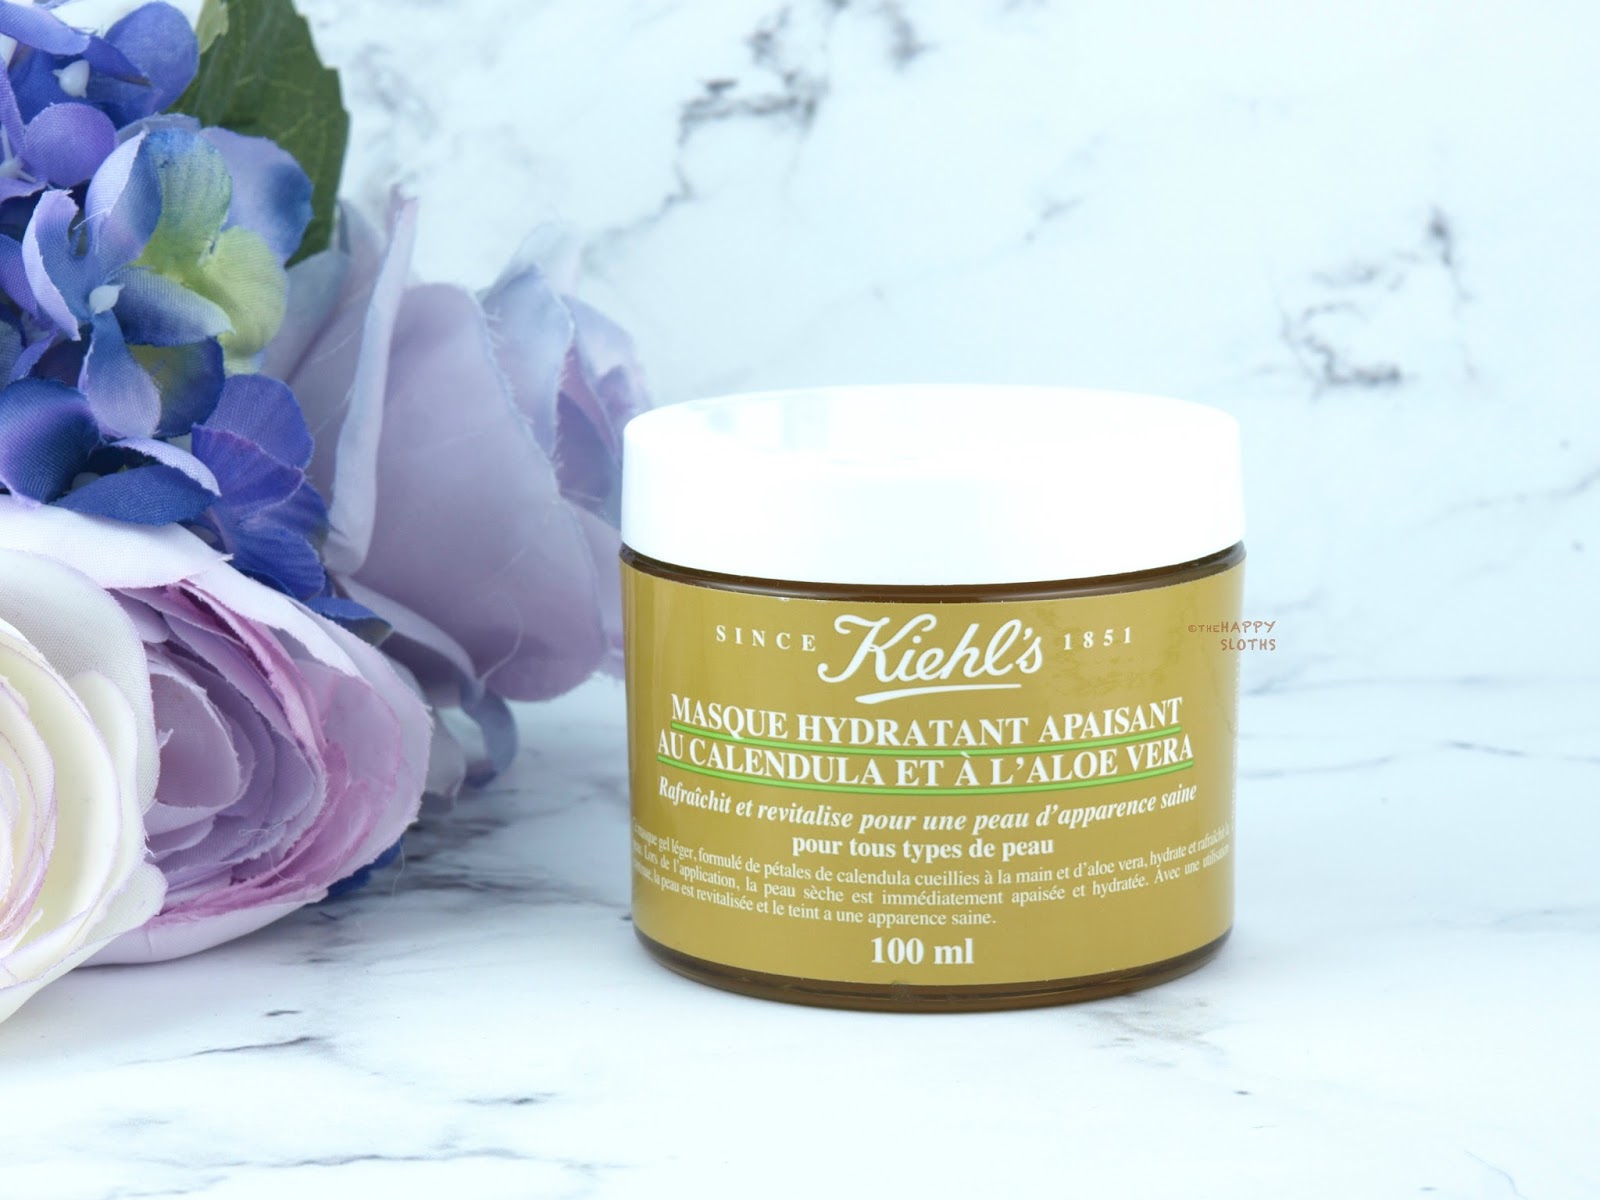 Kiehl's Calendula & Aloe Soothing Hydration Masque: Review